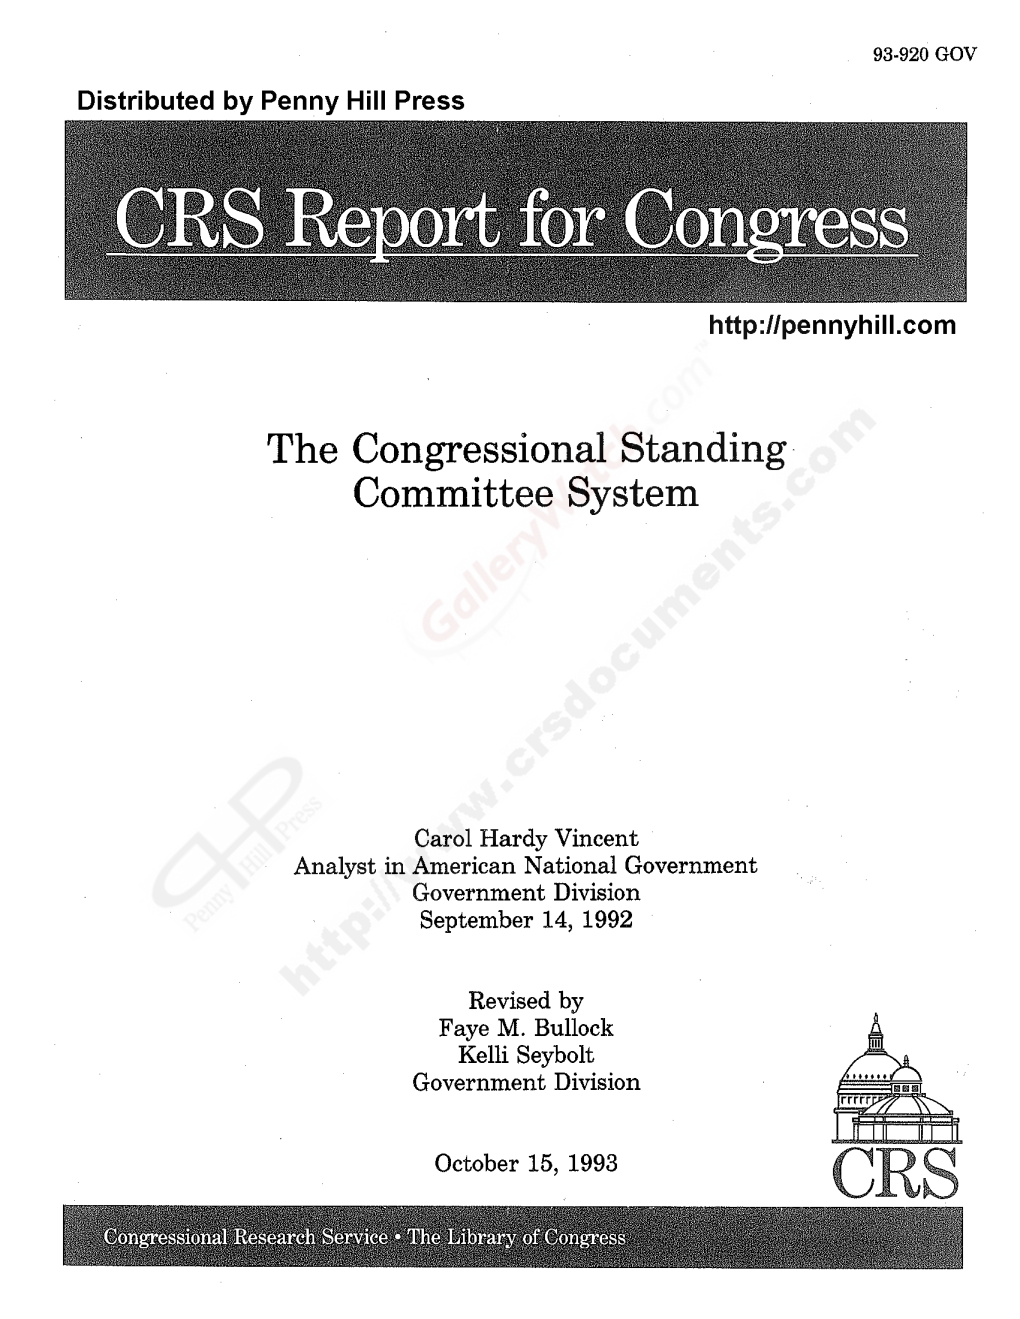 The Congressional Standing Committee System